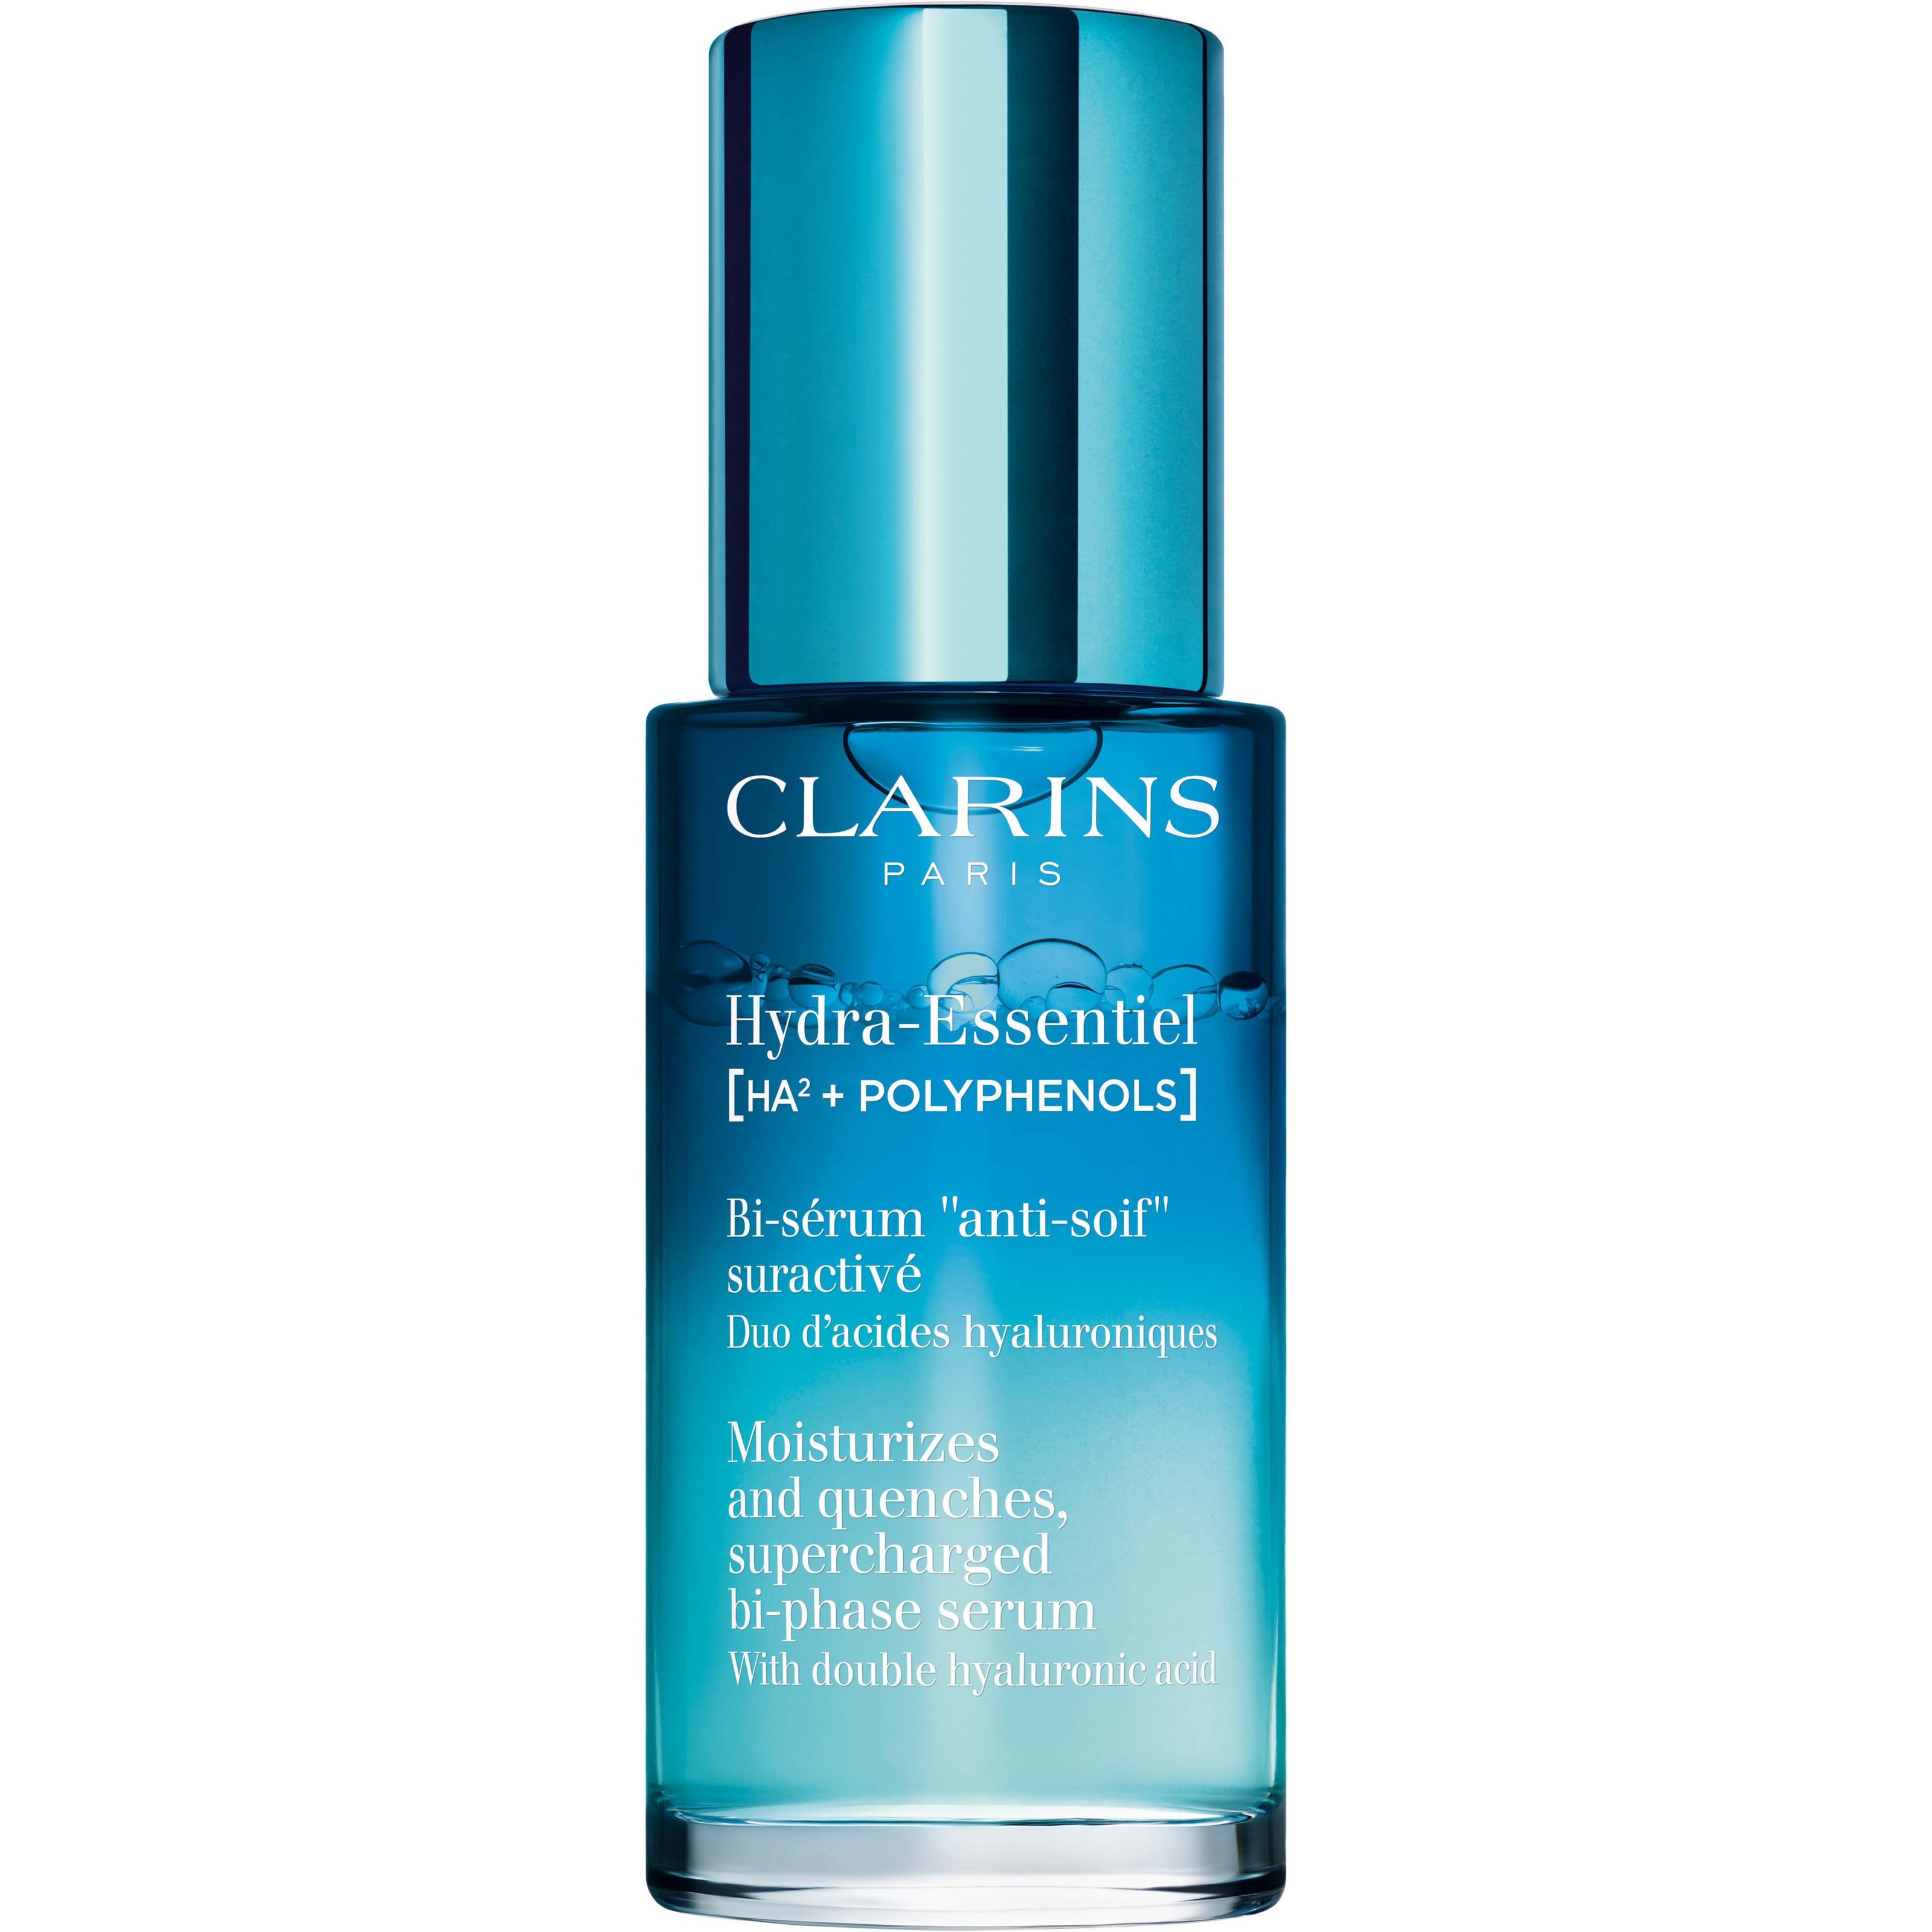 Clarins Hydra-Essentiel Moisturizes and Quenches, Supercharged Bi-phas